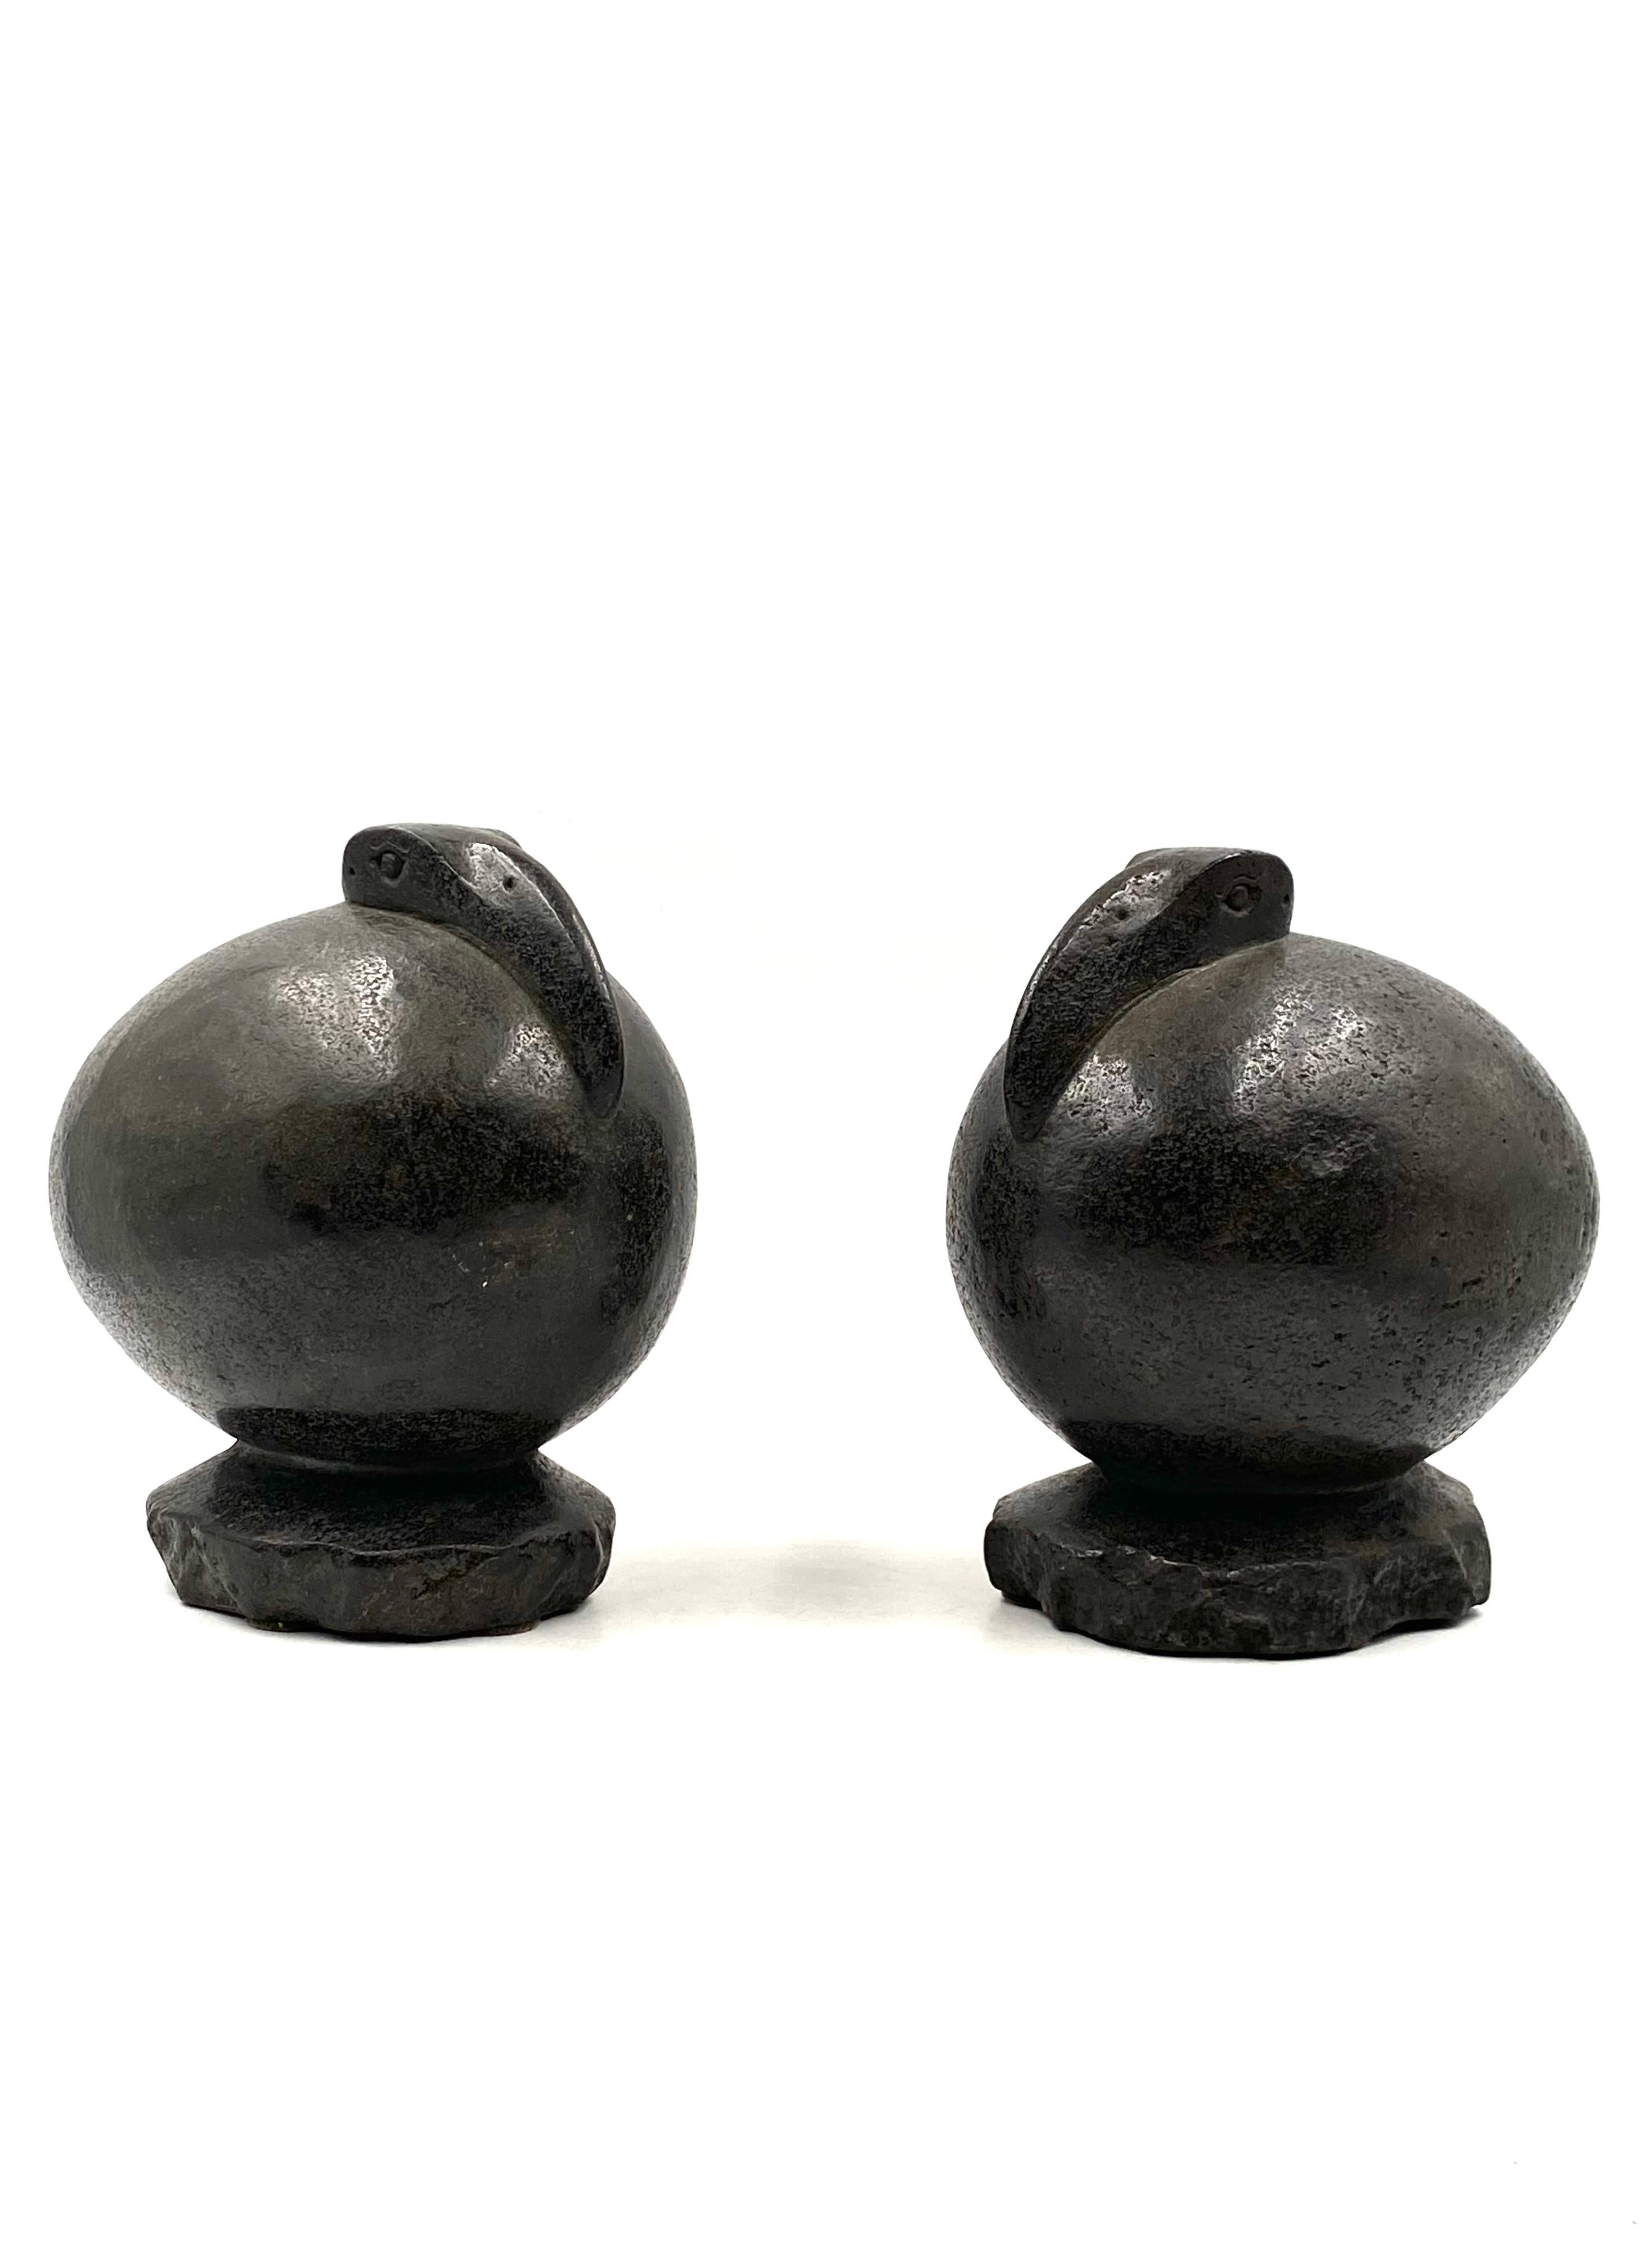 Ibis Birds, Pair of Basalt Ovoid Sculptures, France Early 20th Century 4